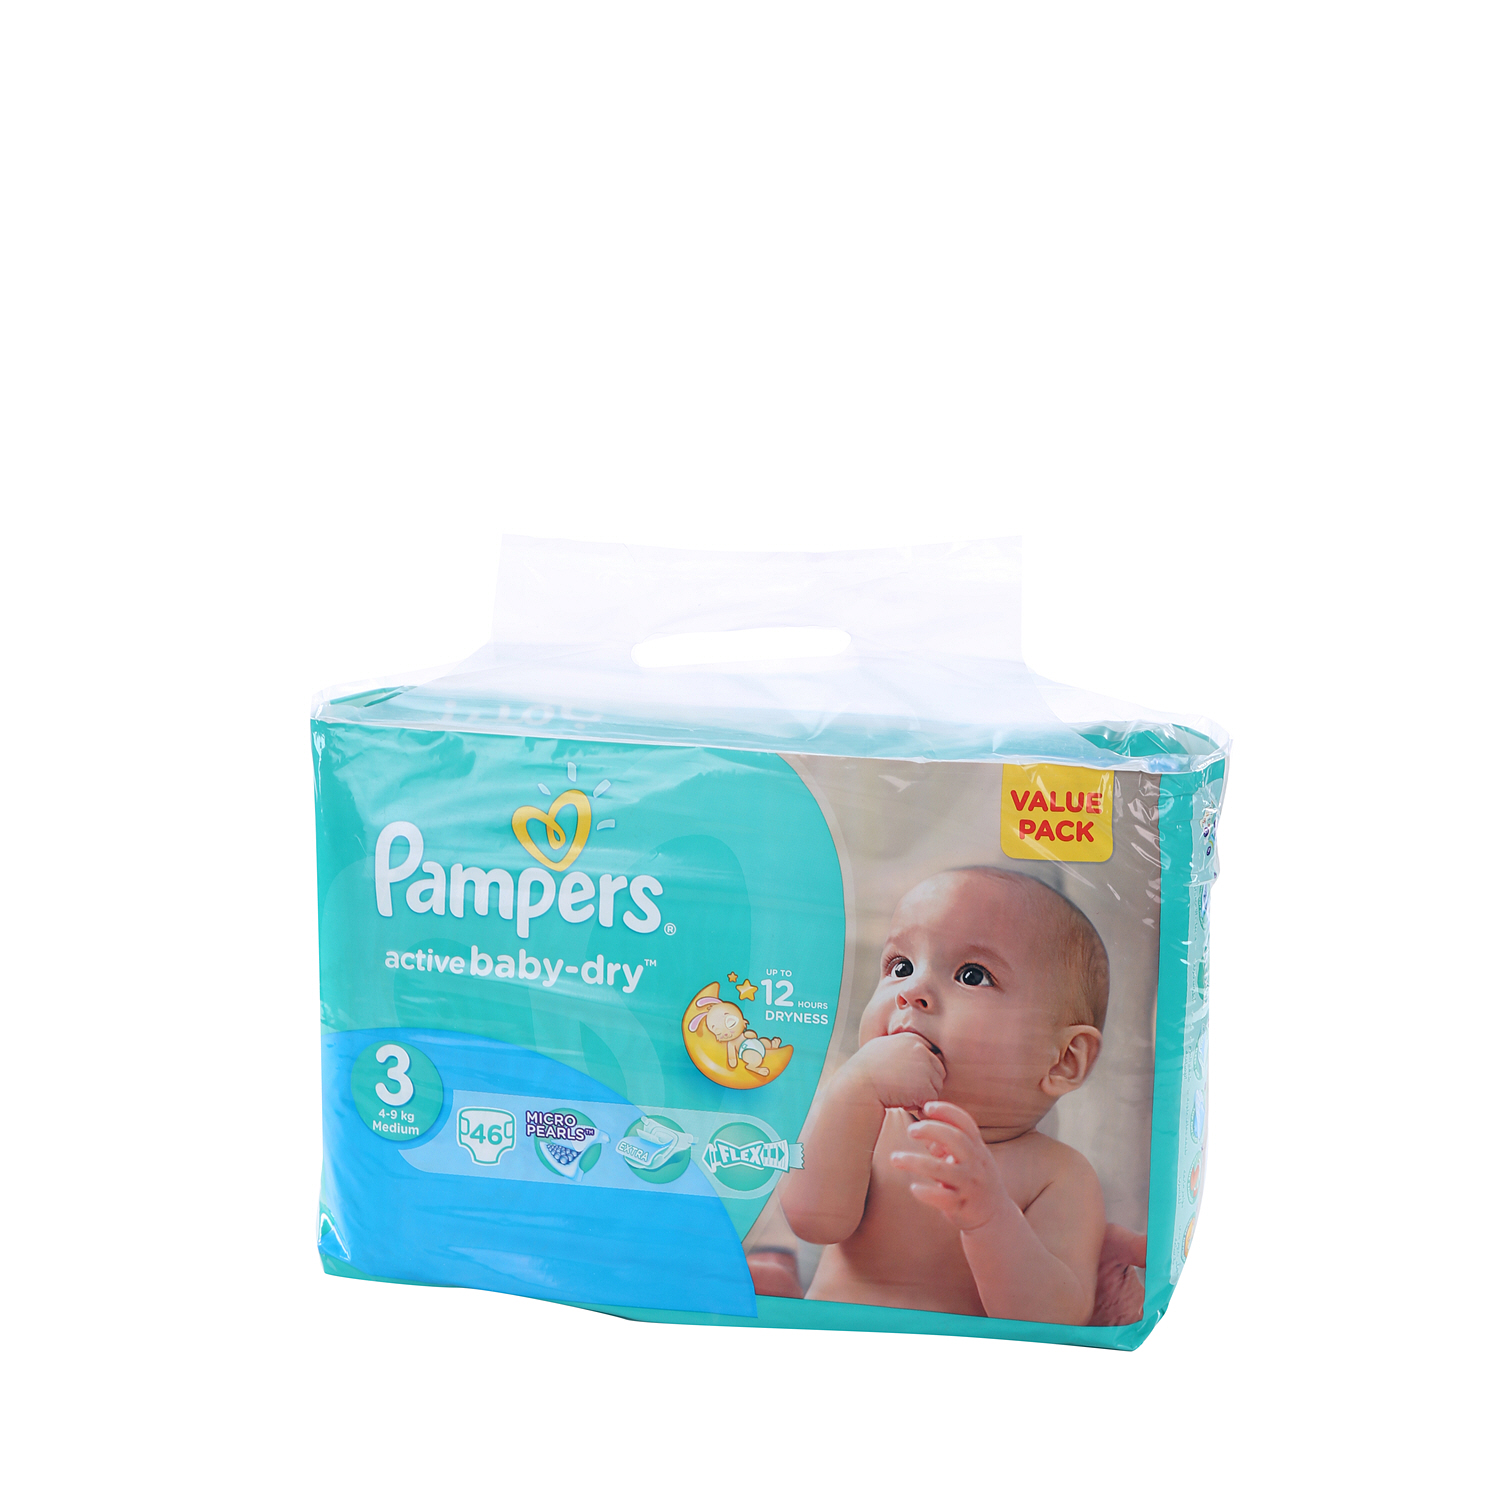 Pampers Active Baby Value Pack Midi 46 Pieces